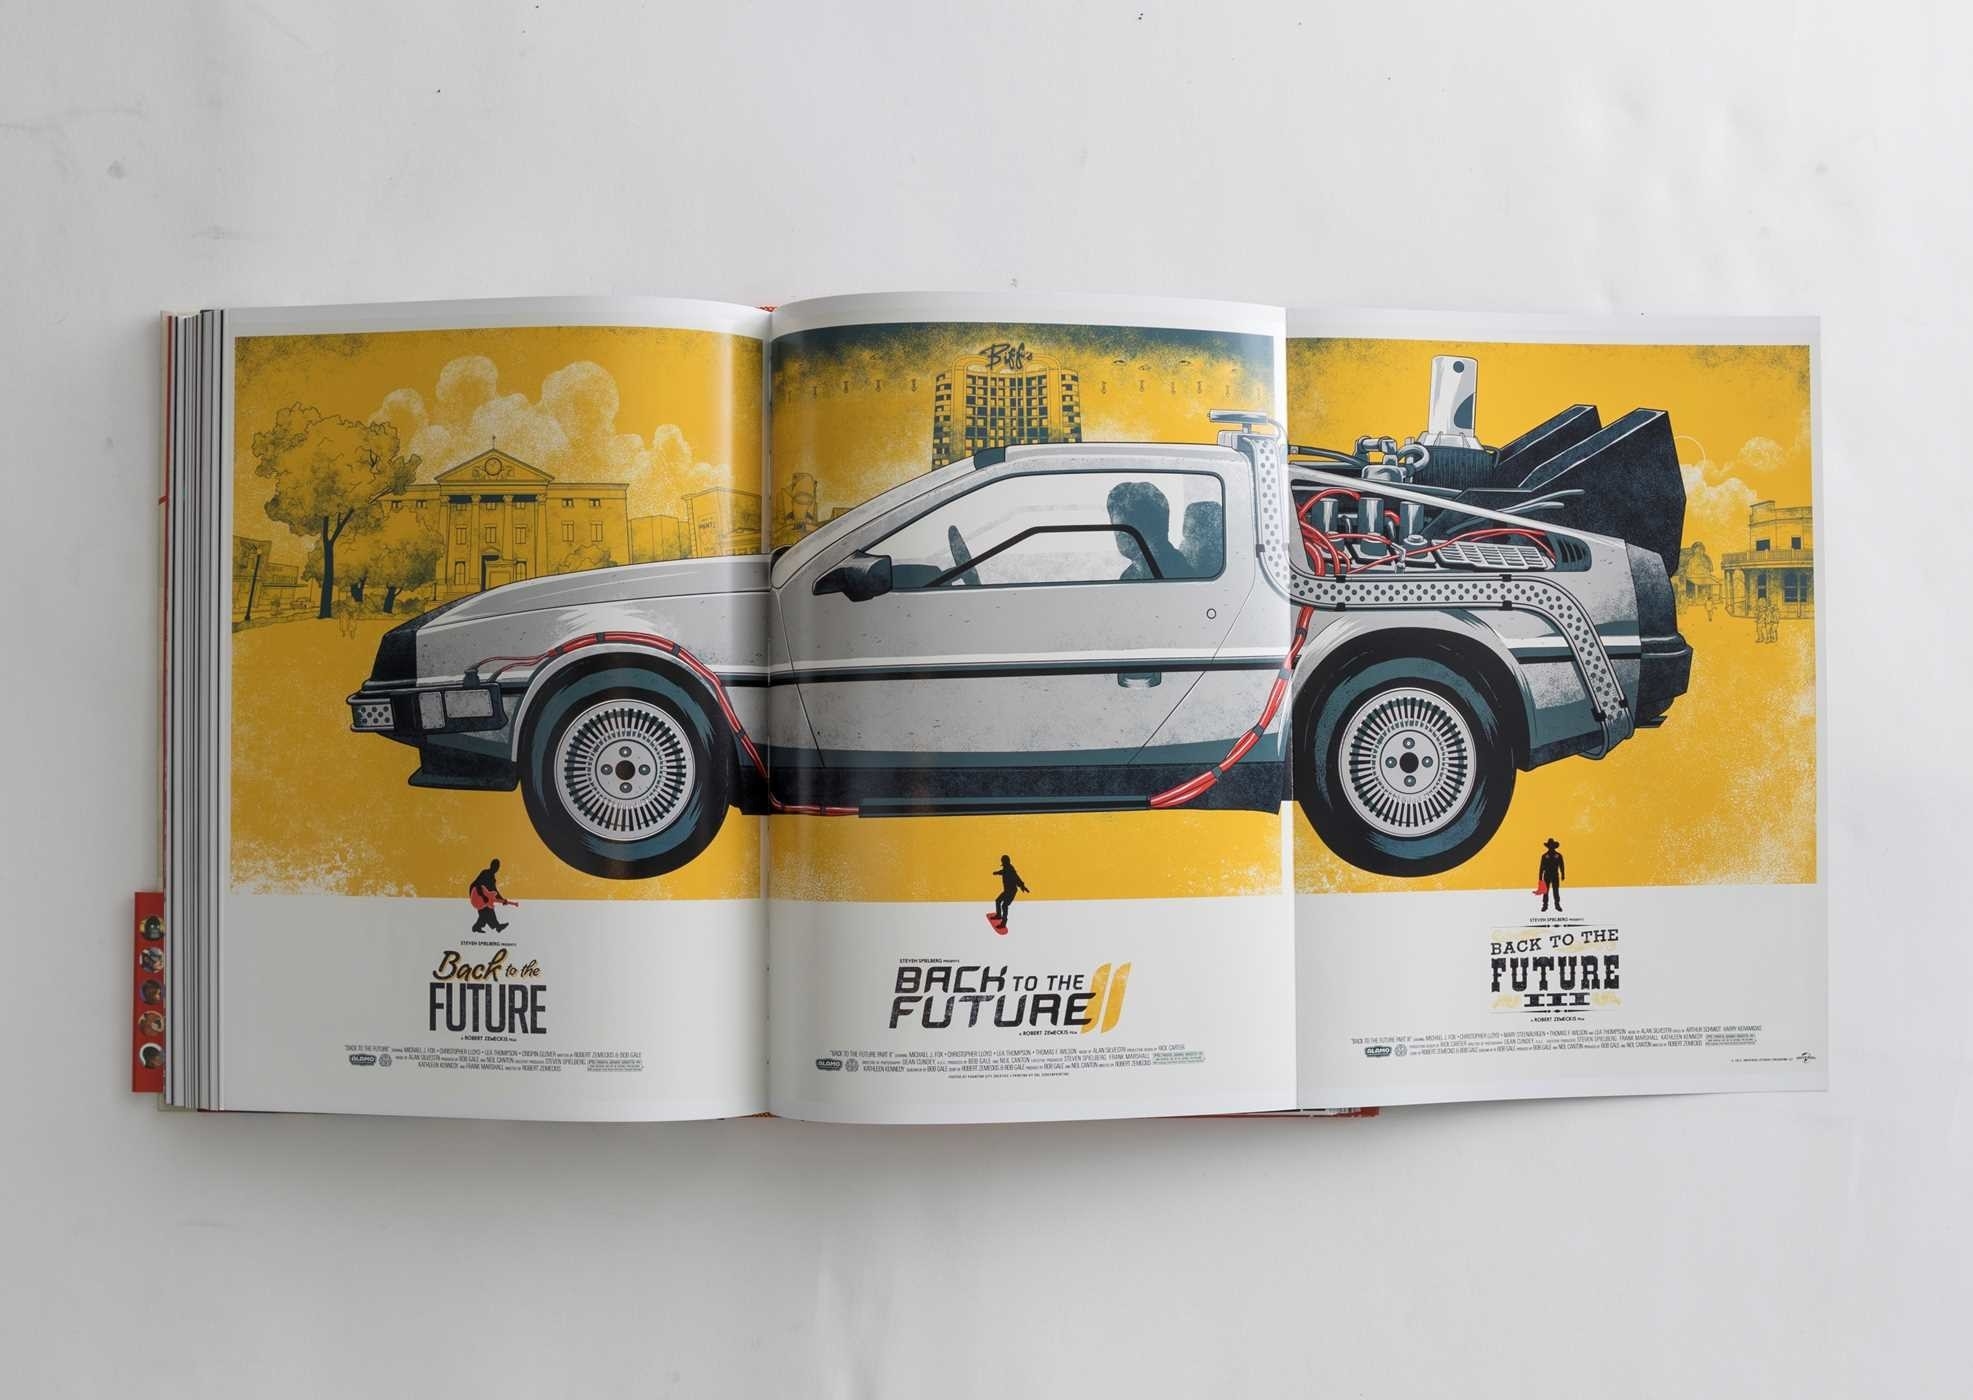 the book opened to an illustration of the car from Back to the Future 